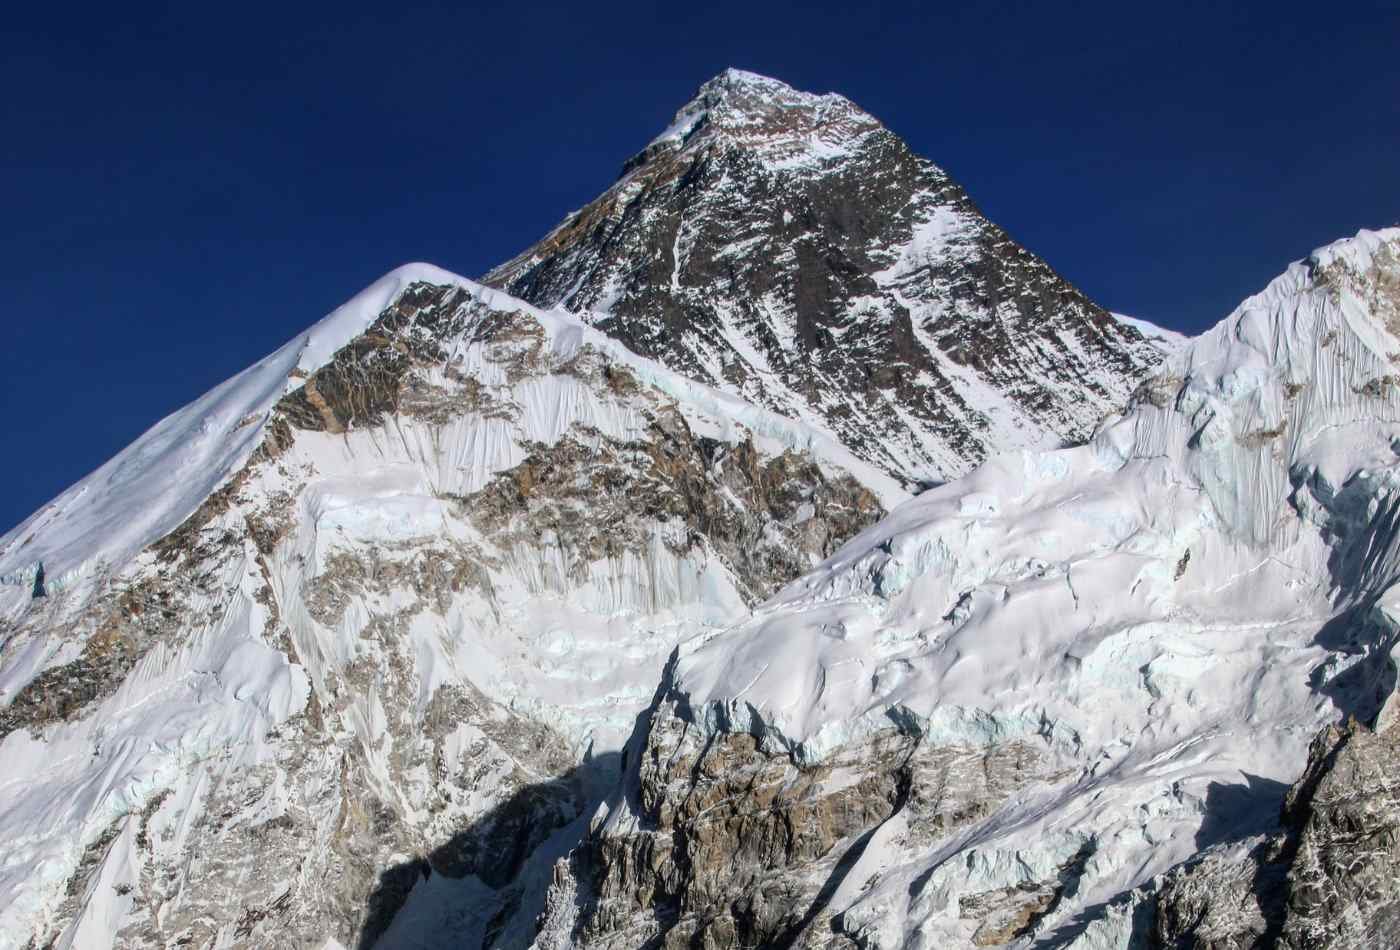 An awe-inspiring view of Mount Everest, as seen from the summit of Gokyo-ri, with the peak of the mountain towering above the surrounding landscape.